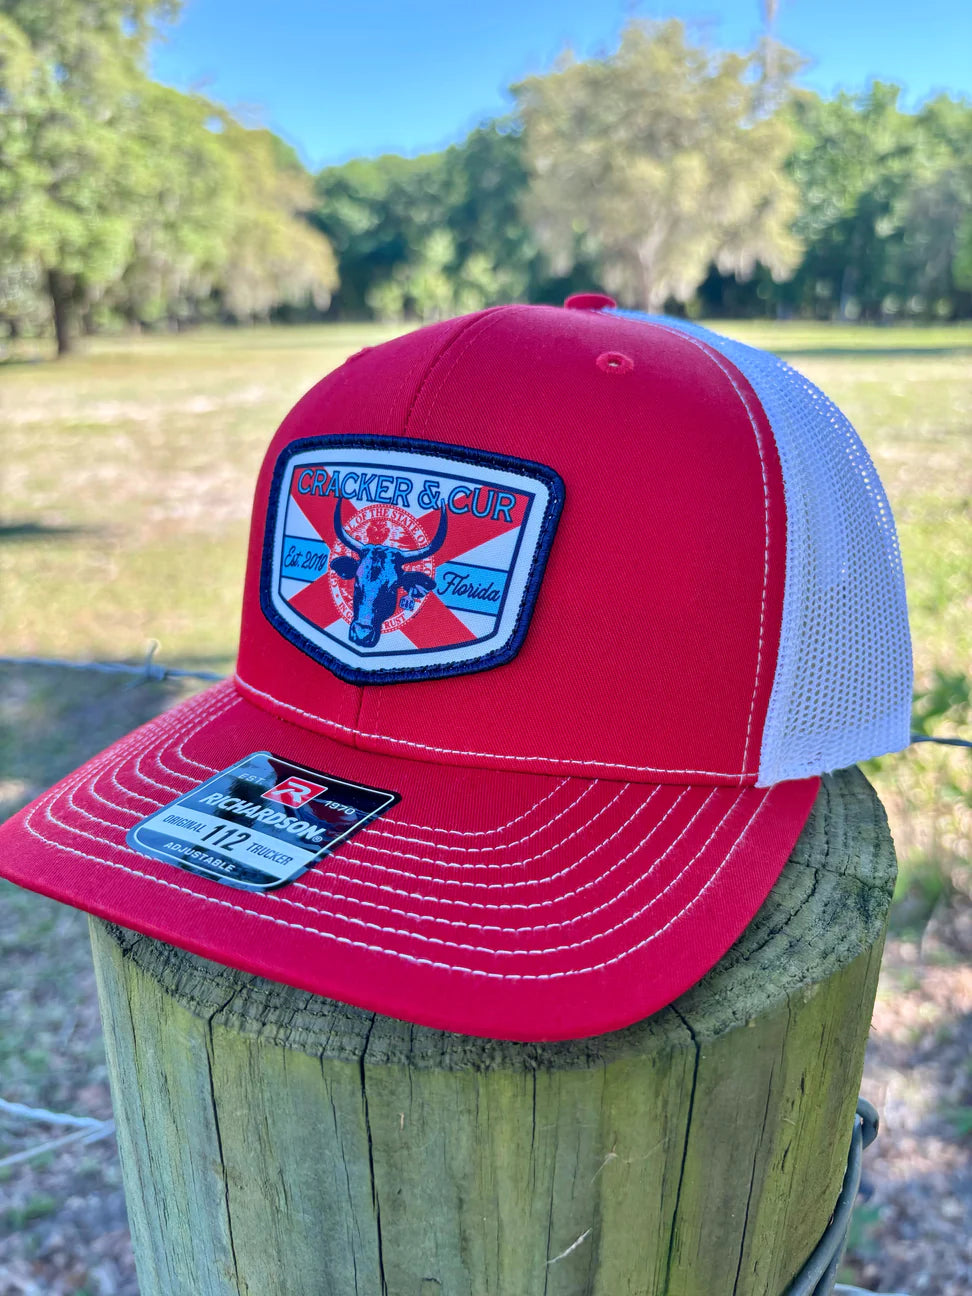 Cracker & Cur Florida Cattle Patch Hat - Red/White